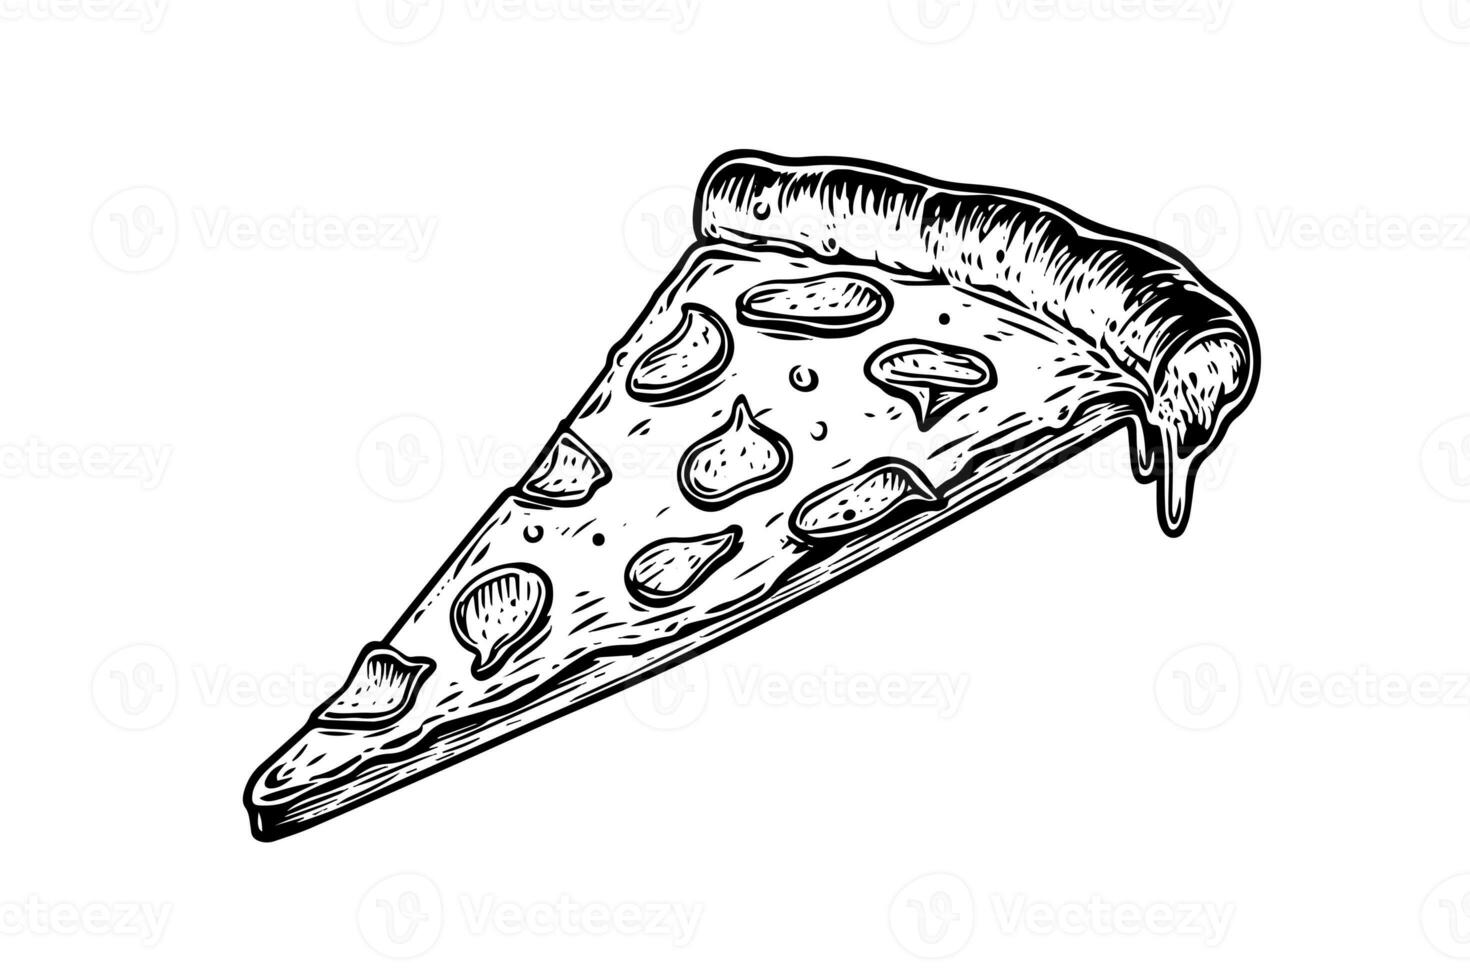 Slice of pizza hand drawn engraving style vector illustration. photo